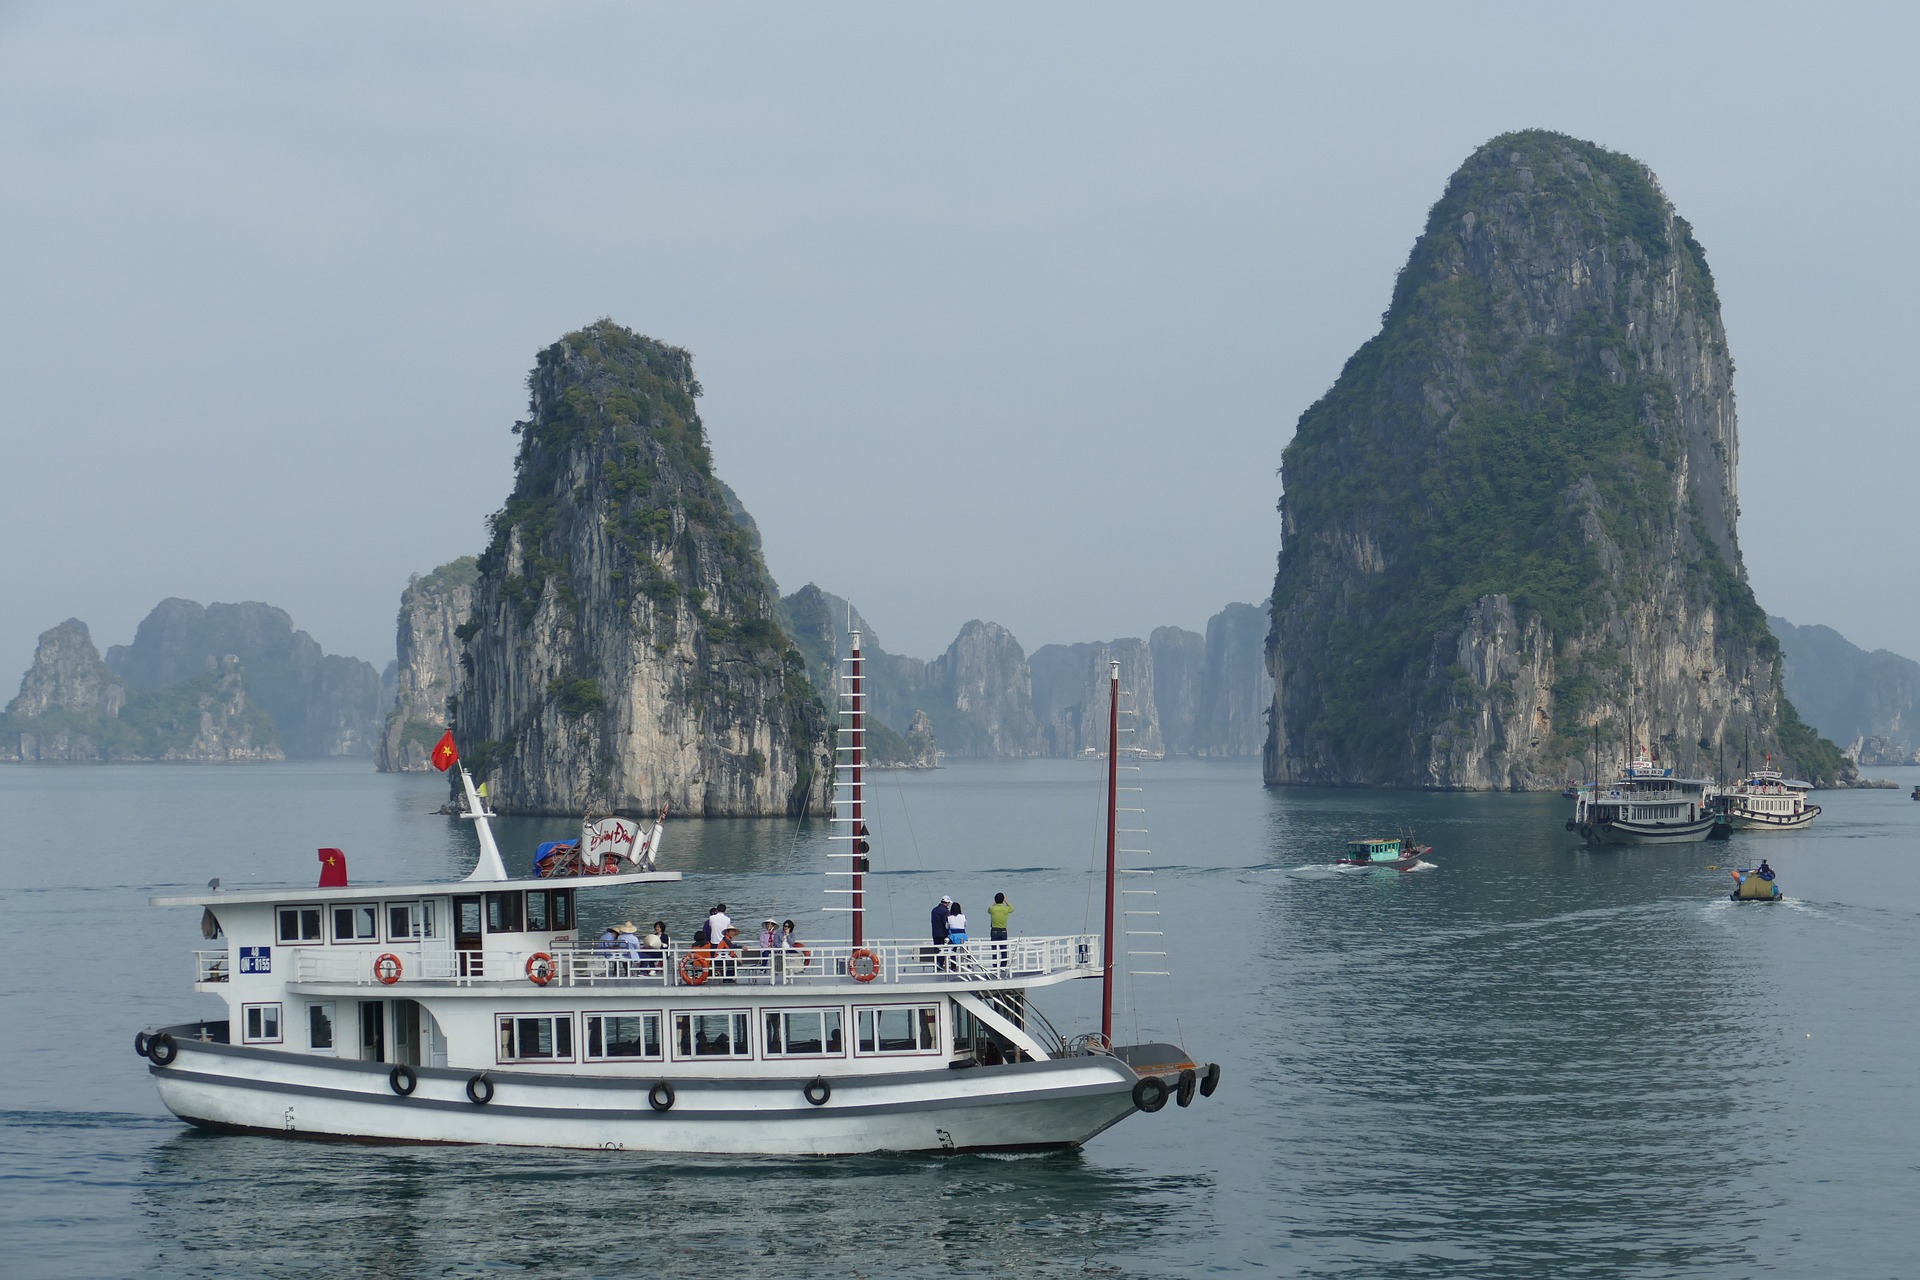 Where to Find the Best Halong Bay Muslim Tour?